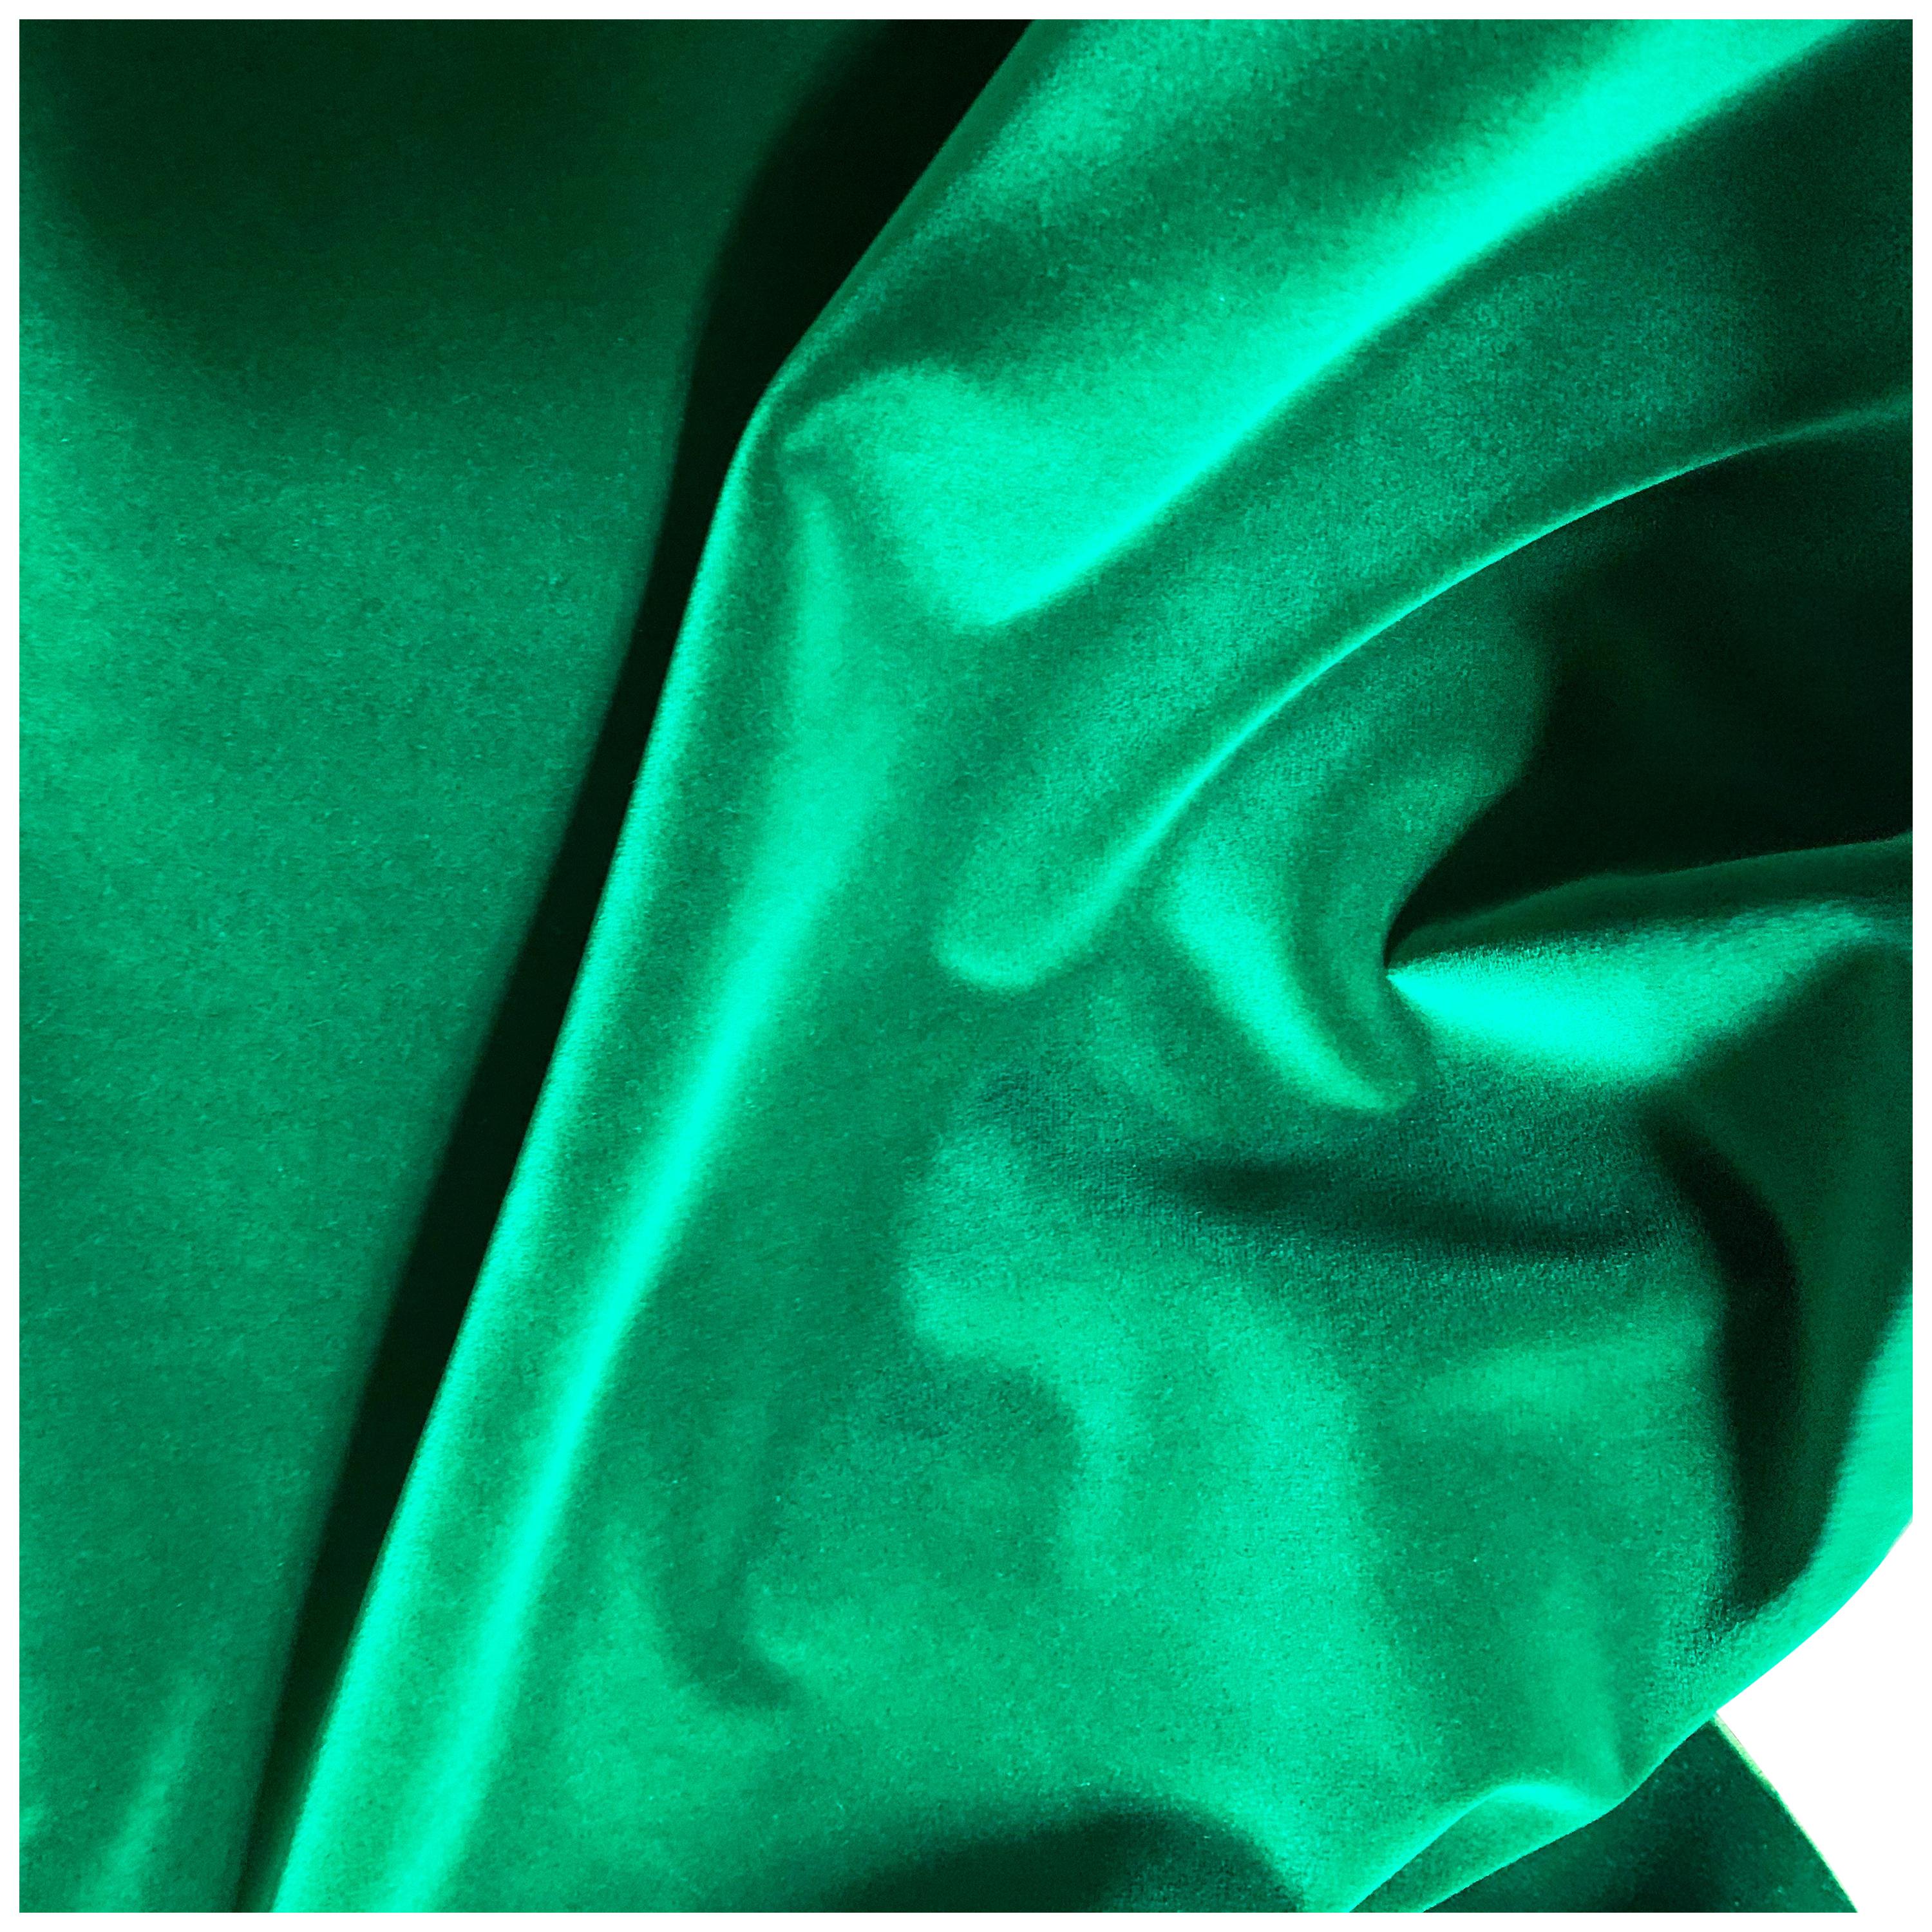 Manuel Canovas Emeraude cotton velvet Rivoli, emerald green, jewel tone textile 6 yards. 52” width. Lovely cotton velvet, gorgeous drape and subtle sheen, fresh color. Pile is 100 percent cotton and backing 93% cotton and 7% modal. Made in Czech